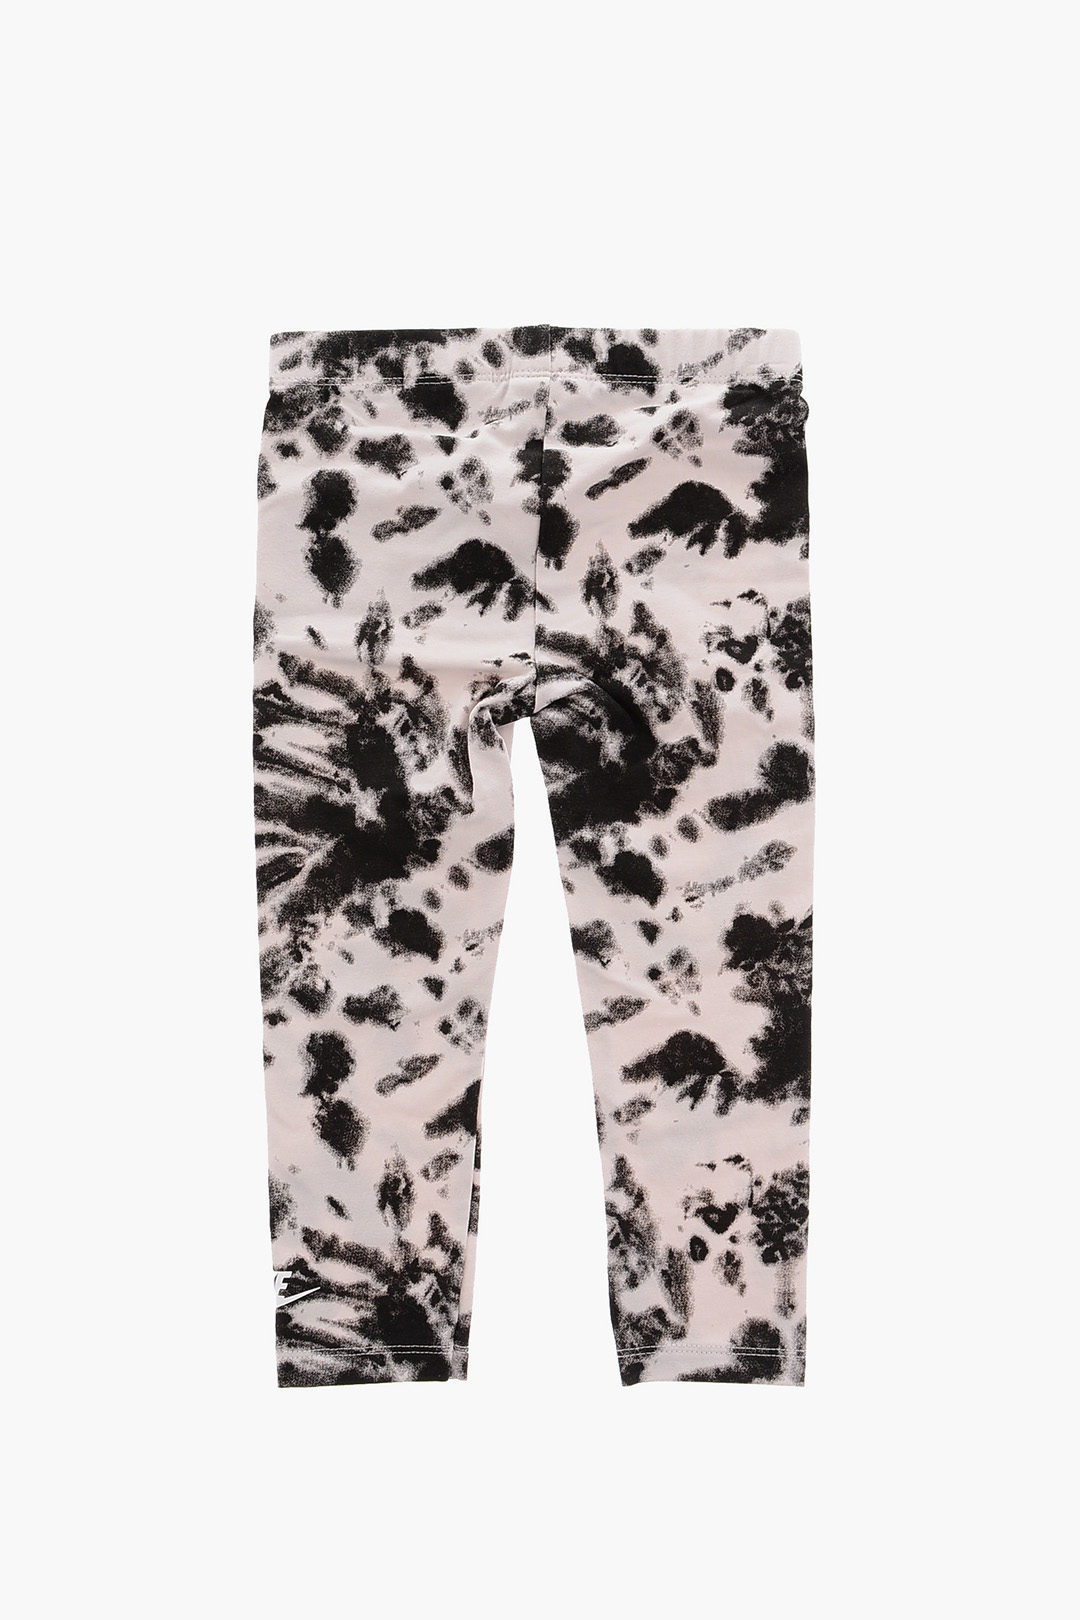 Convention lack Communism Nike KIDS Tie Dye Effect Legging and T-shirt Set girls - Glamood Outlet